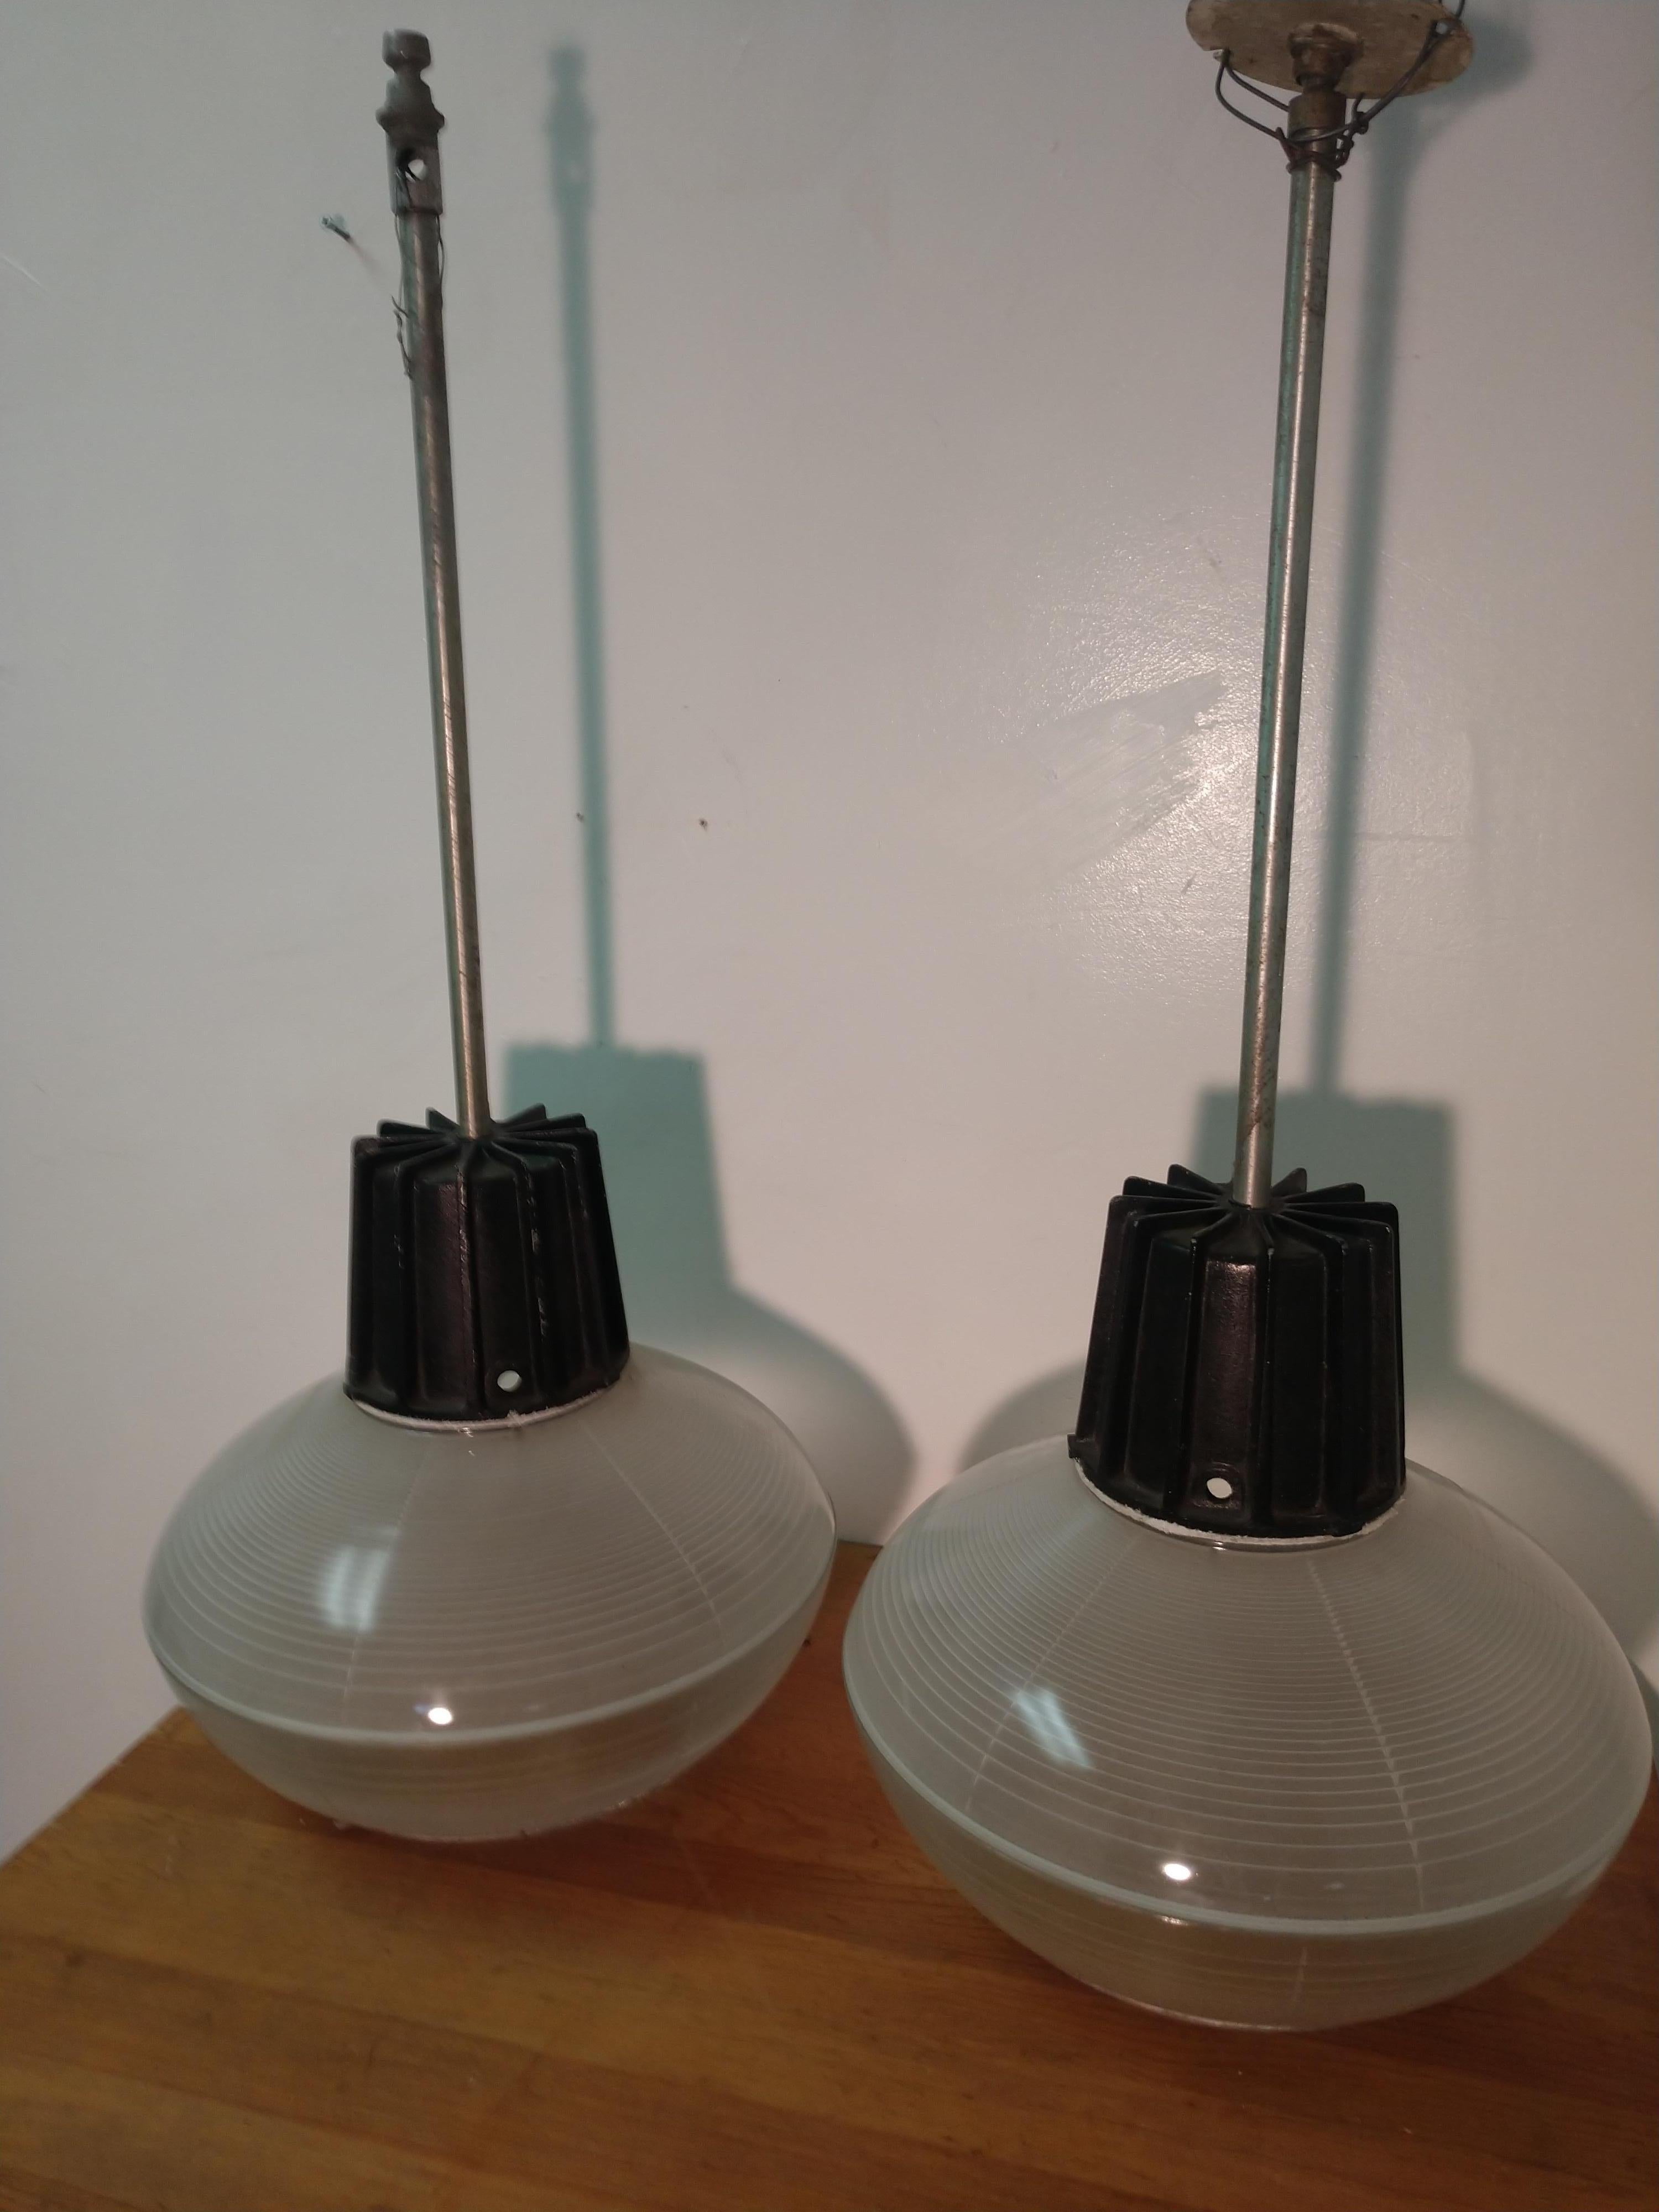 Pair of Mid-Century Modern C1955 Holophane Industrial Lamps In Good Condition For Sale In Port Jervis, NY